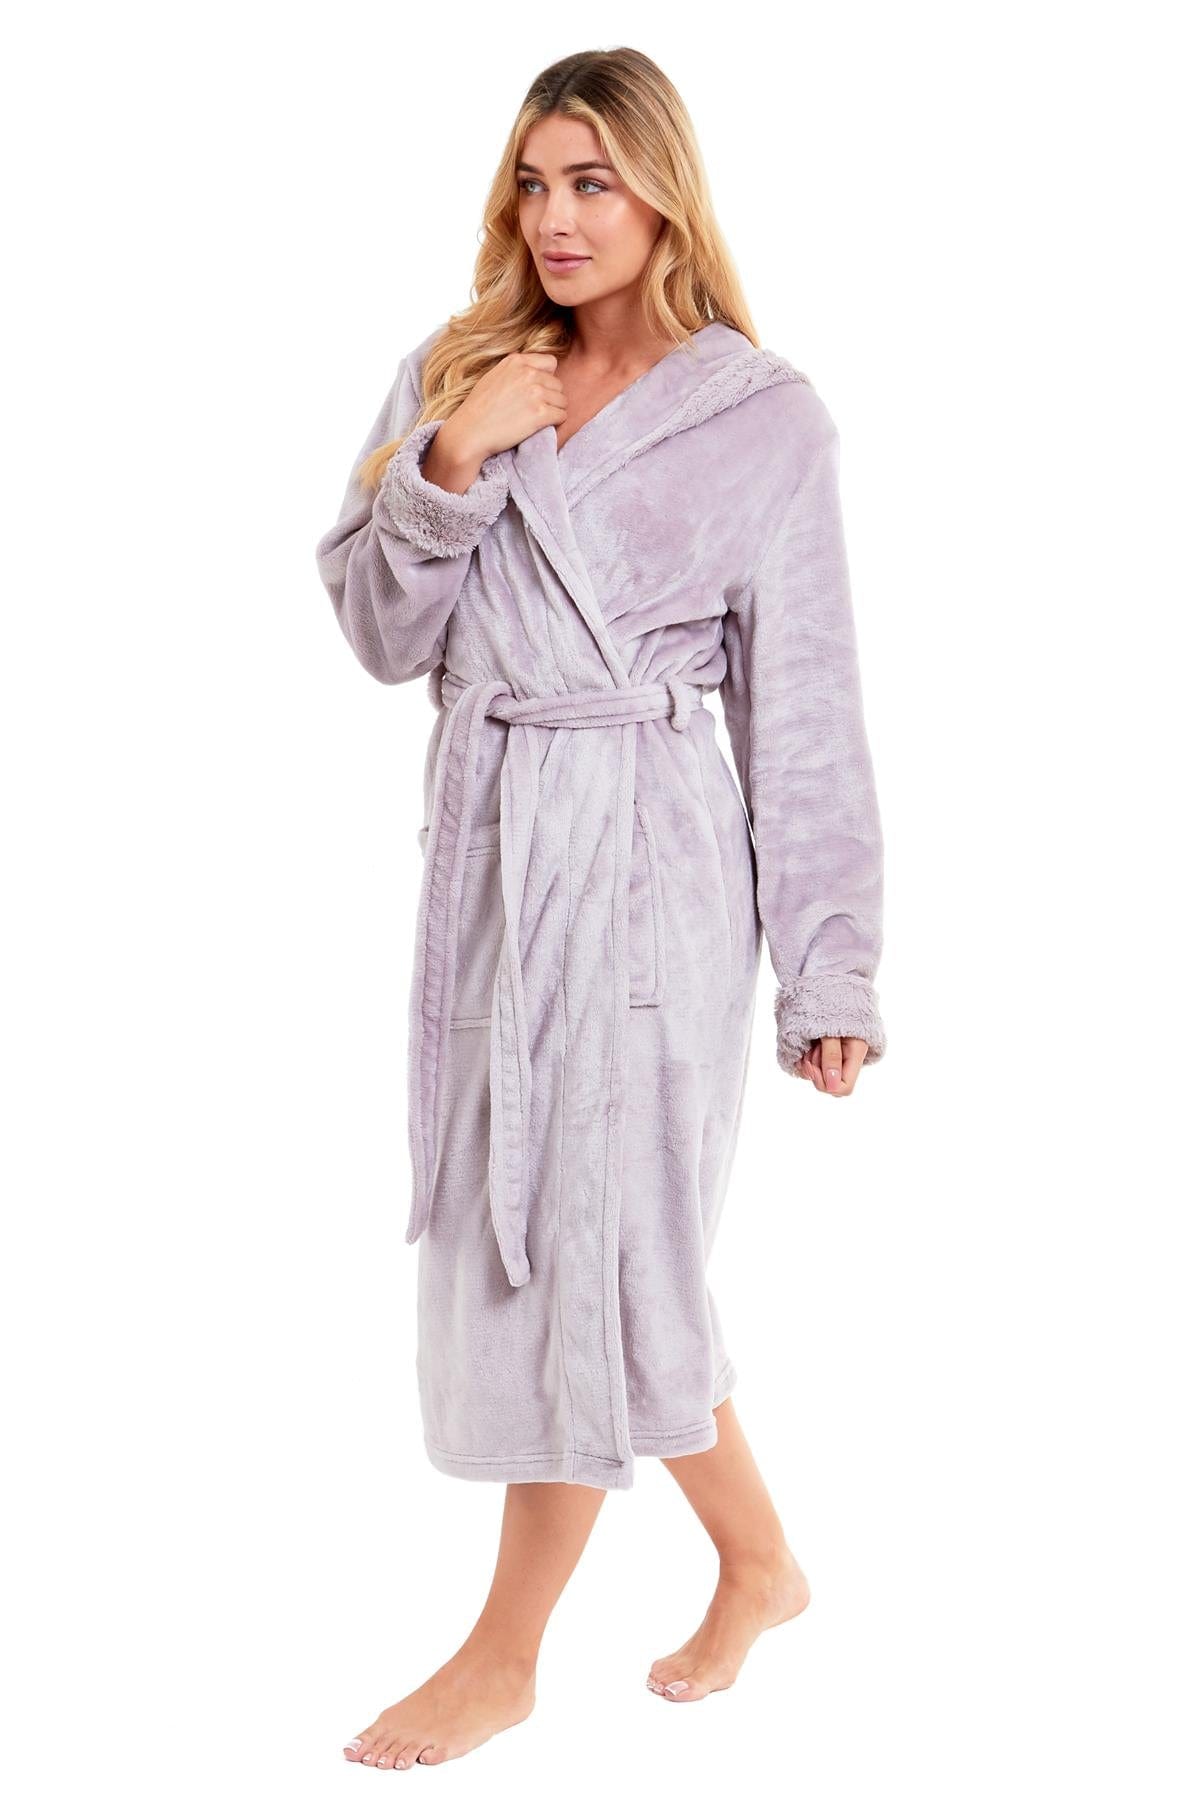 Women's Faux Fur Hooded Robe Dressing Gown, Super Soft Bath Robe OLIVIA ROCCO Dressing Gown